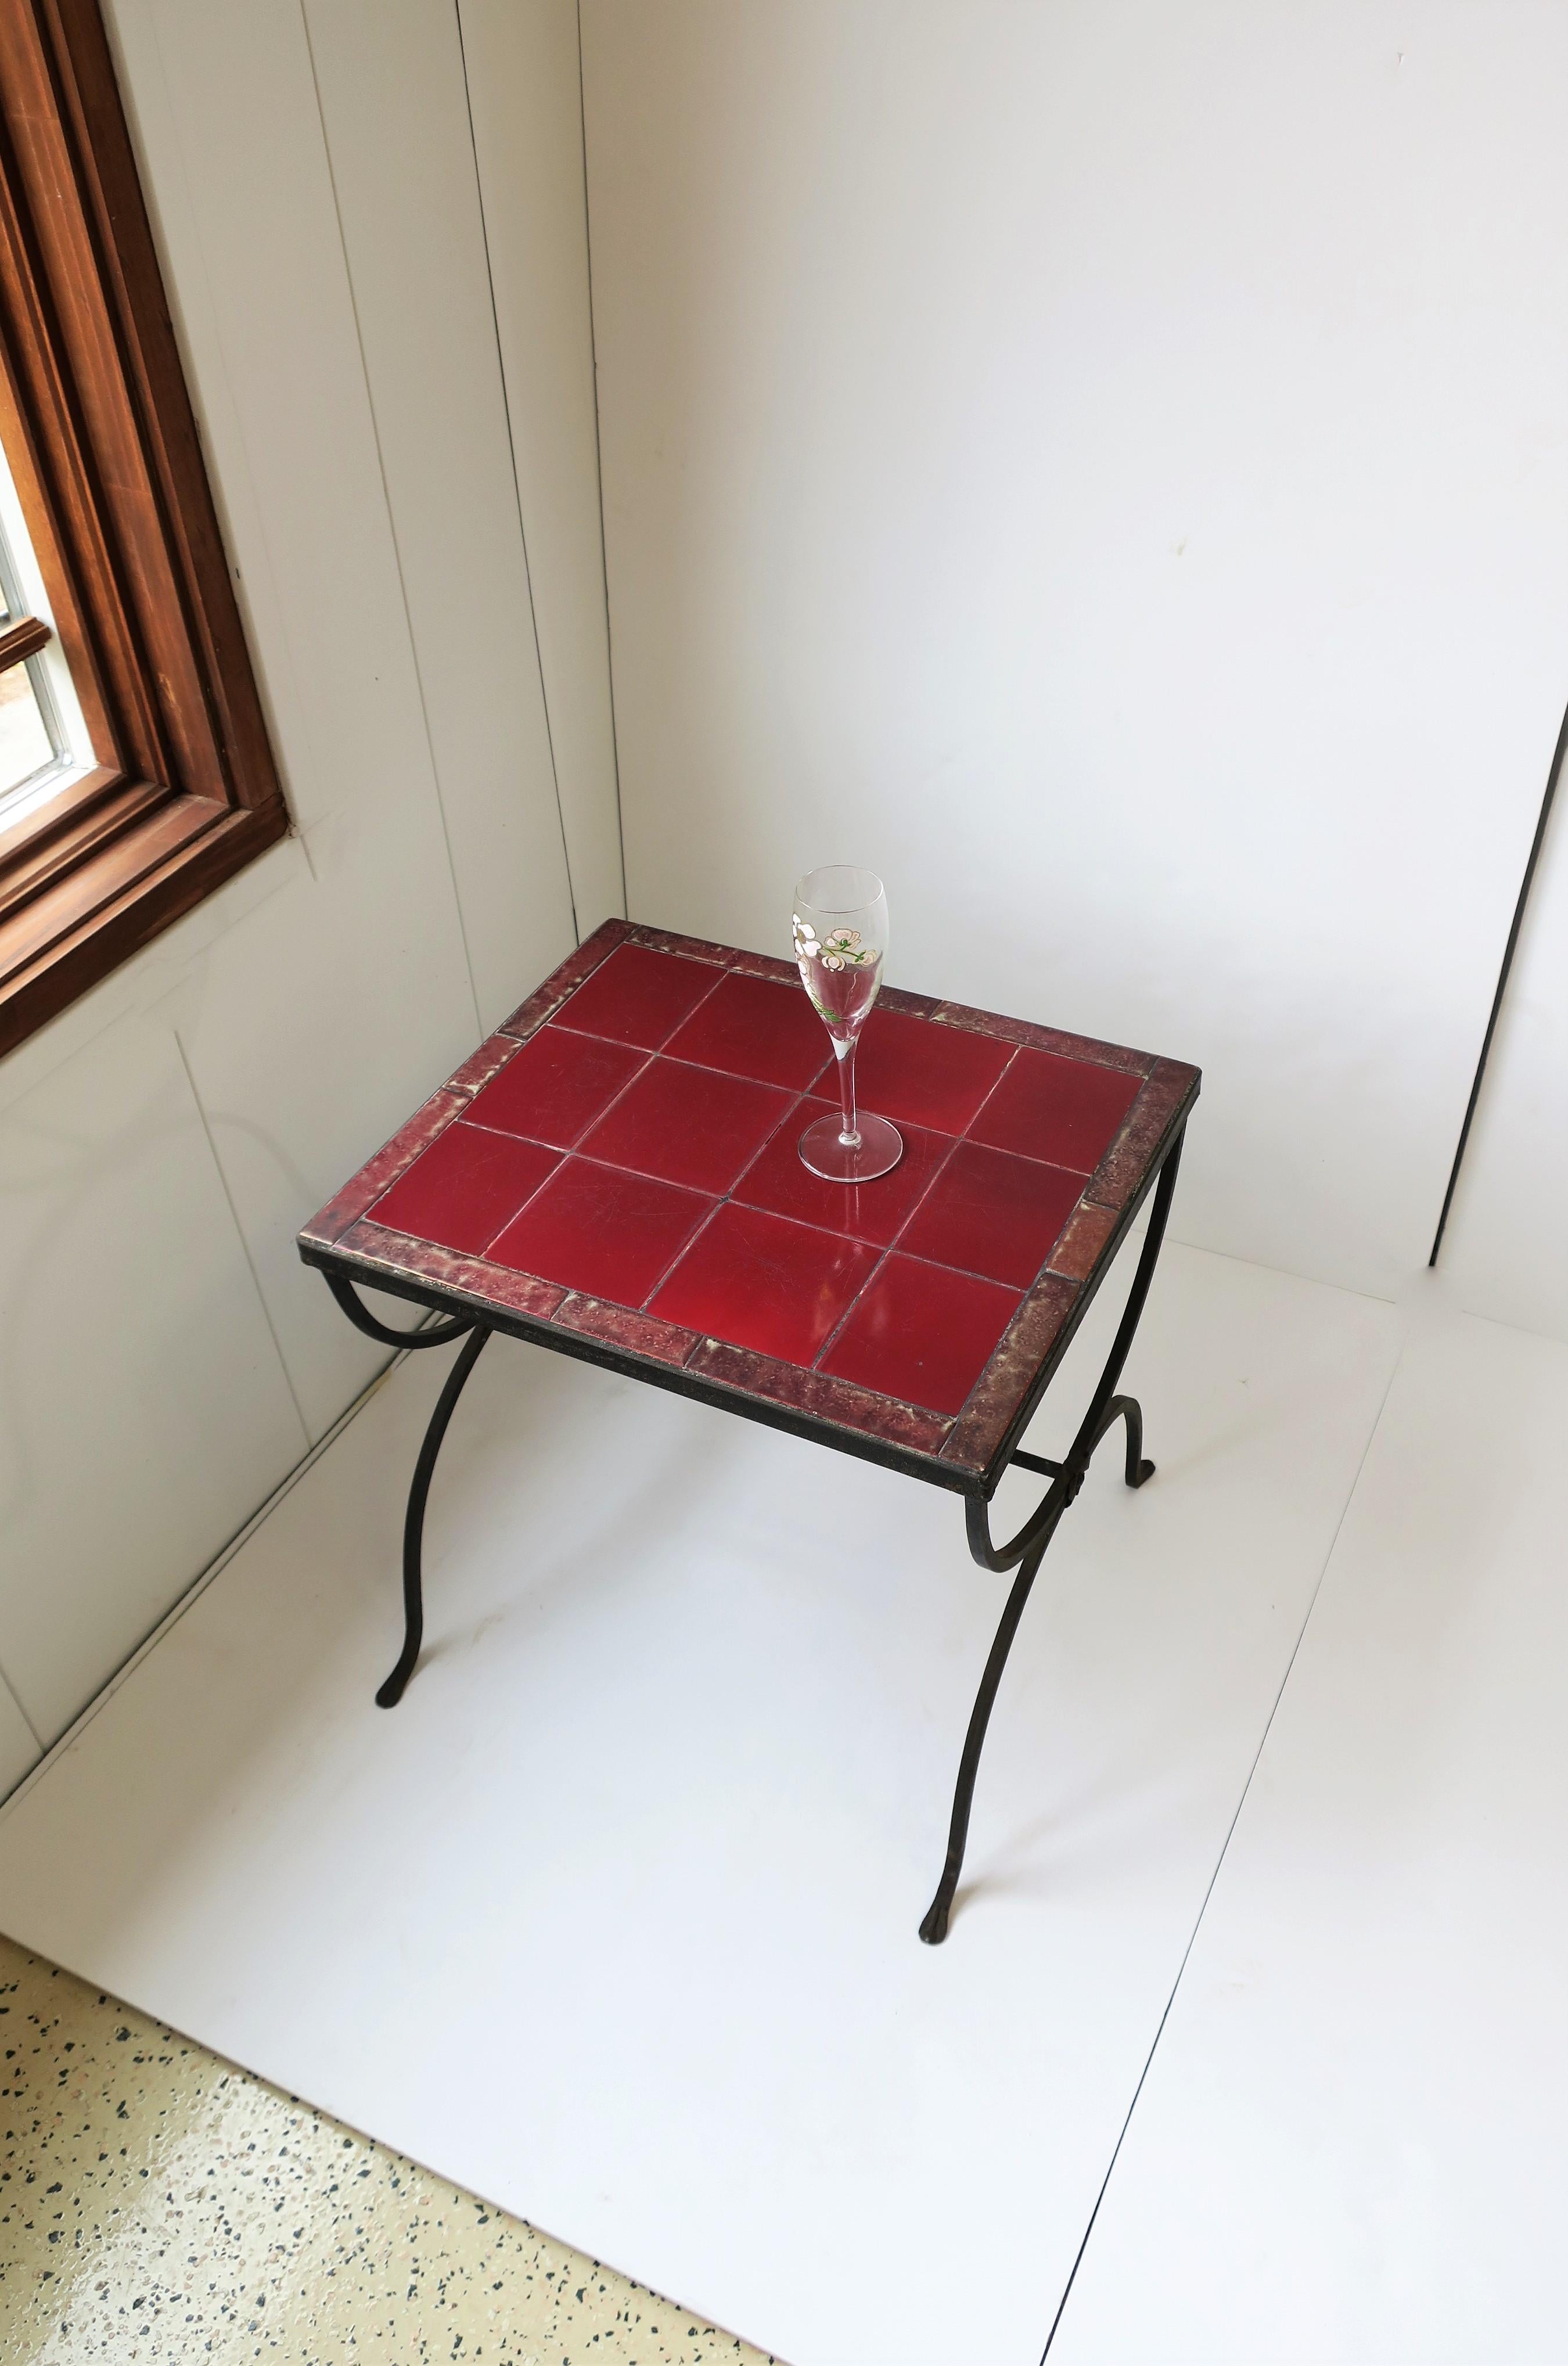 Ceramic Red Burgundy Tile Top & Iron Side or End Table Patio & Outdoors Regency Revival